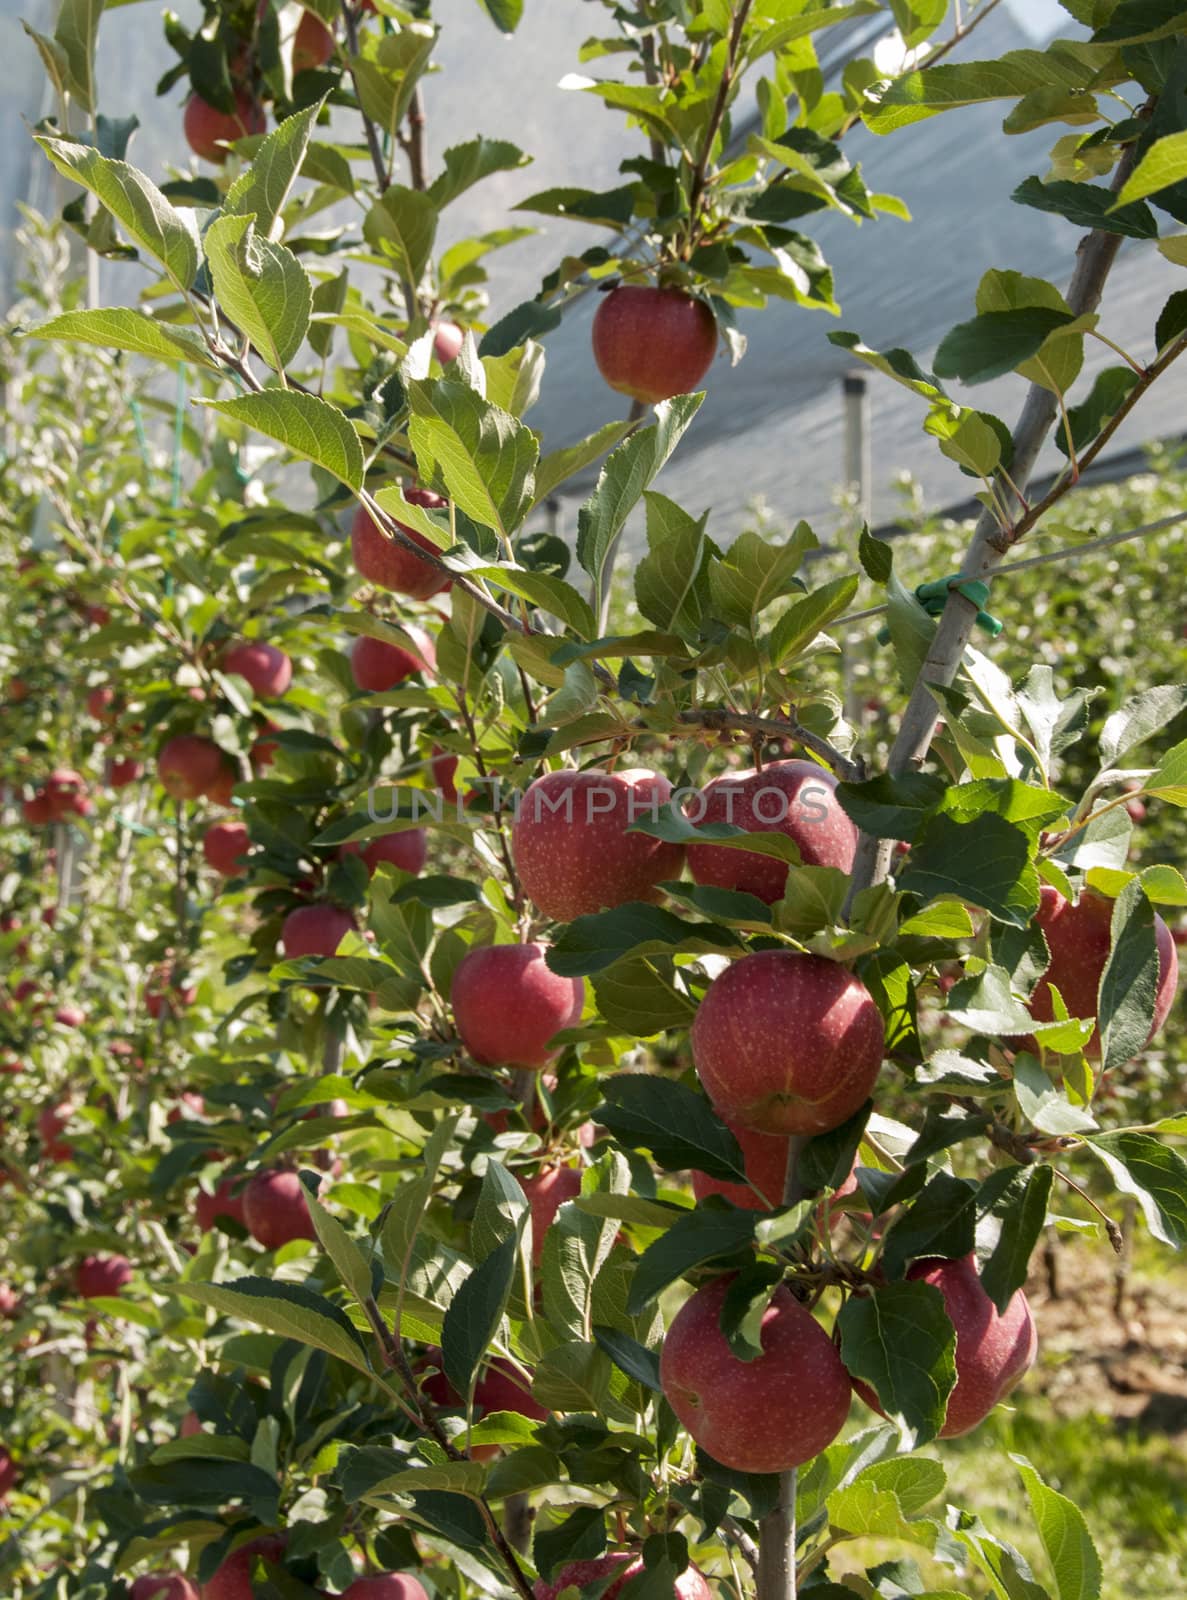 the red delicious apple from north Italy the region Trentino